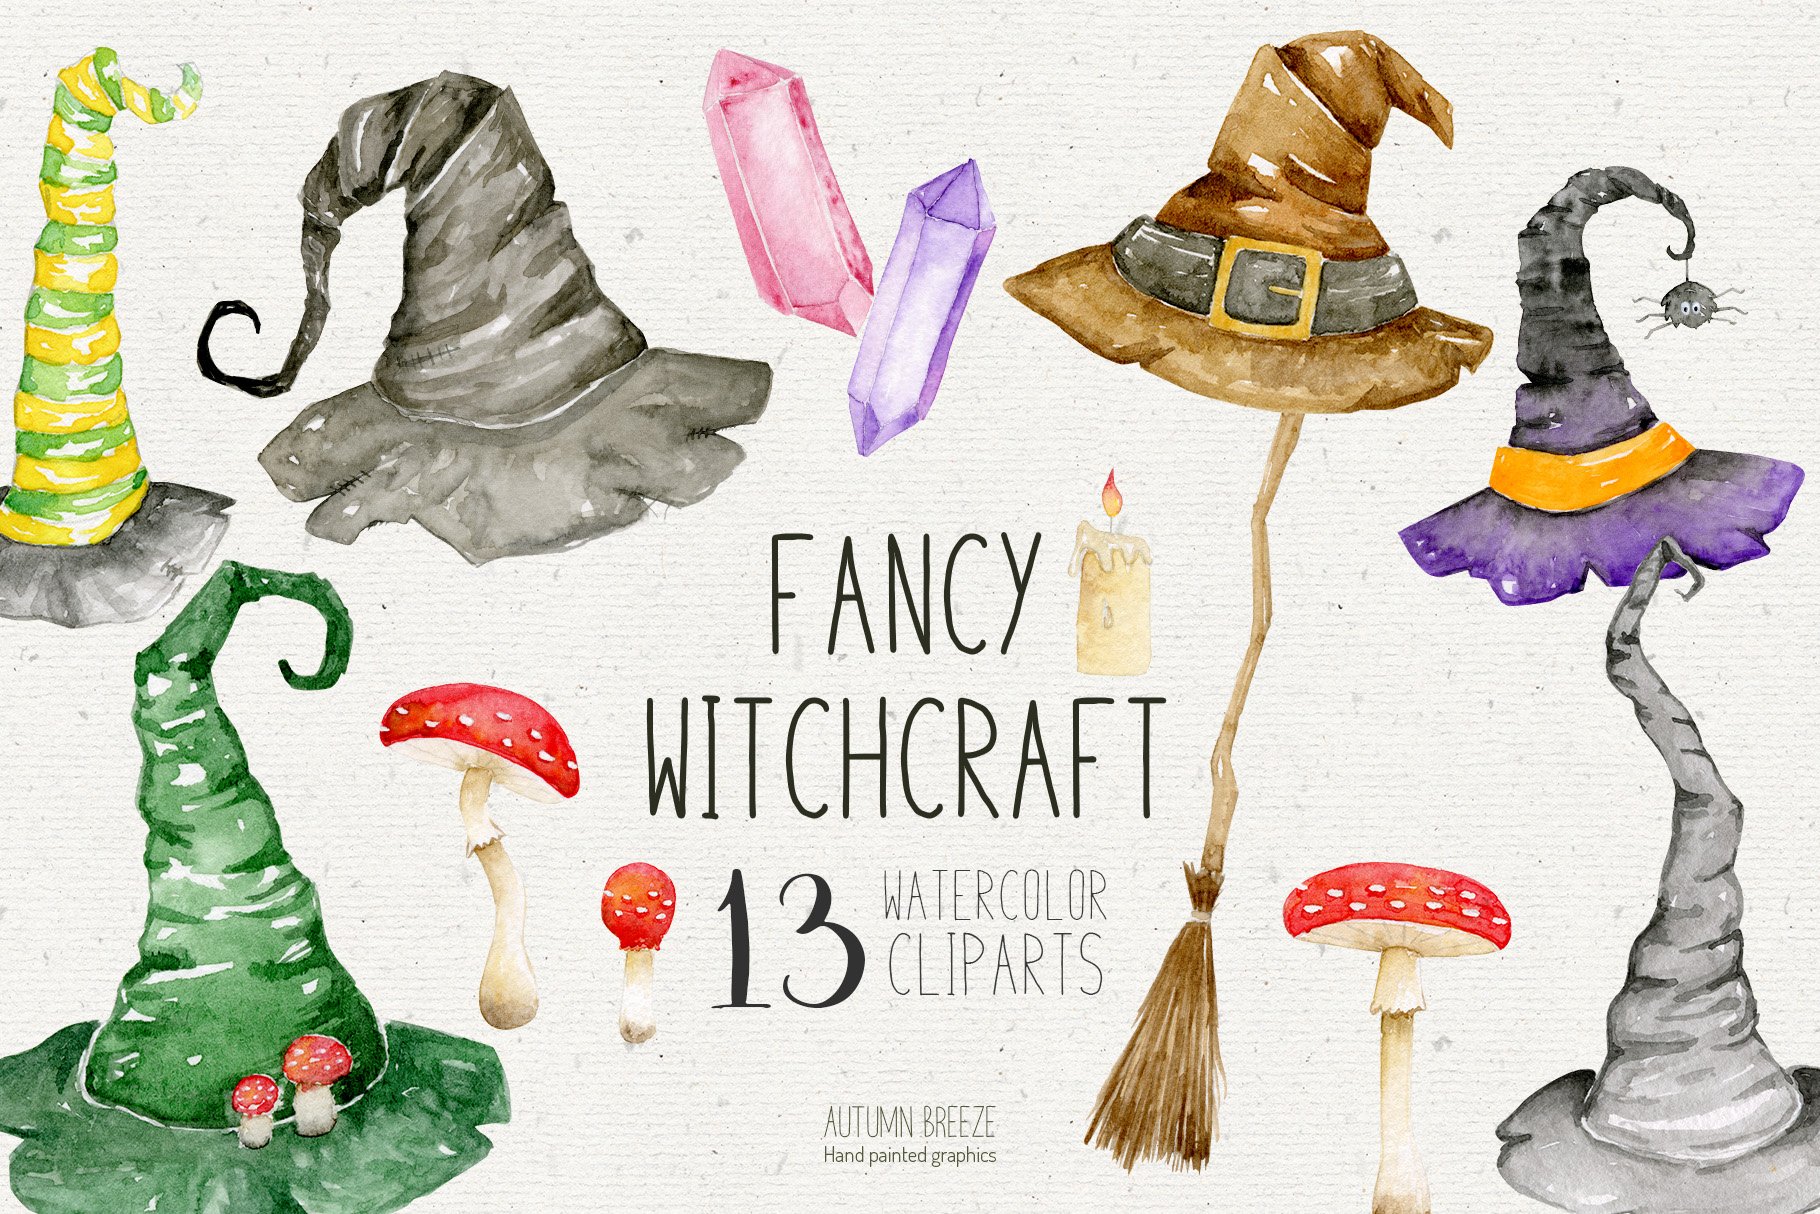 watercolor witchcraft clipart cover image.